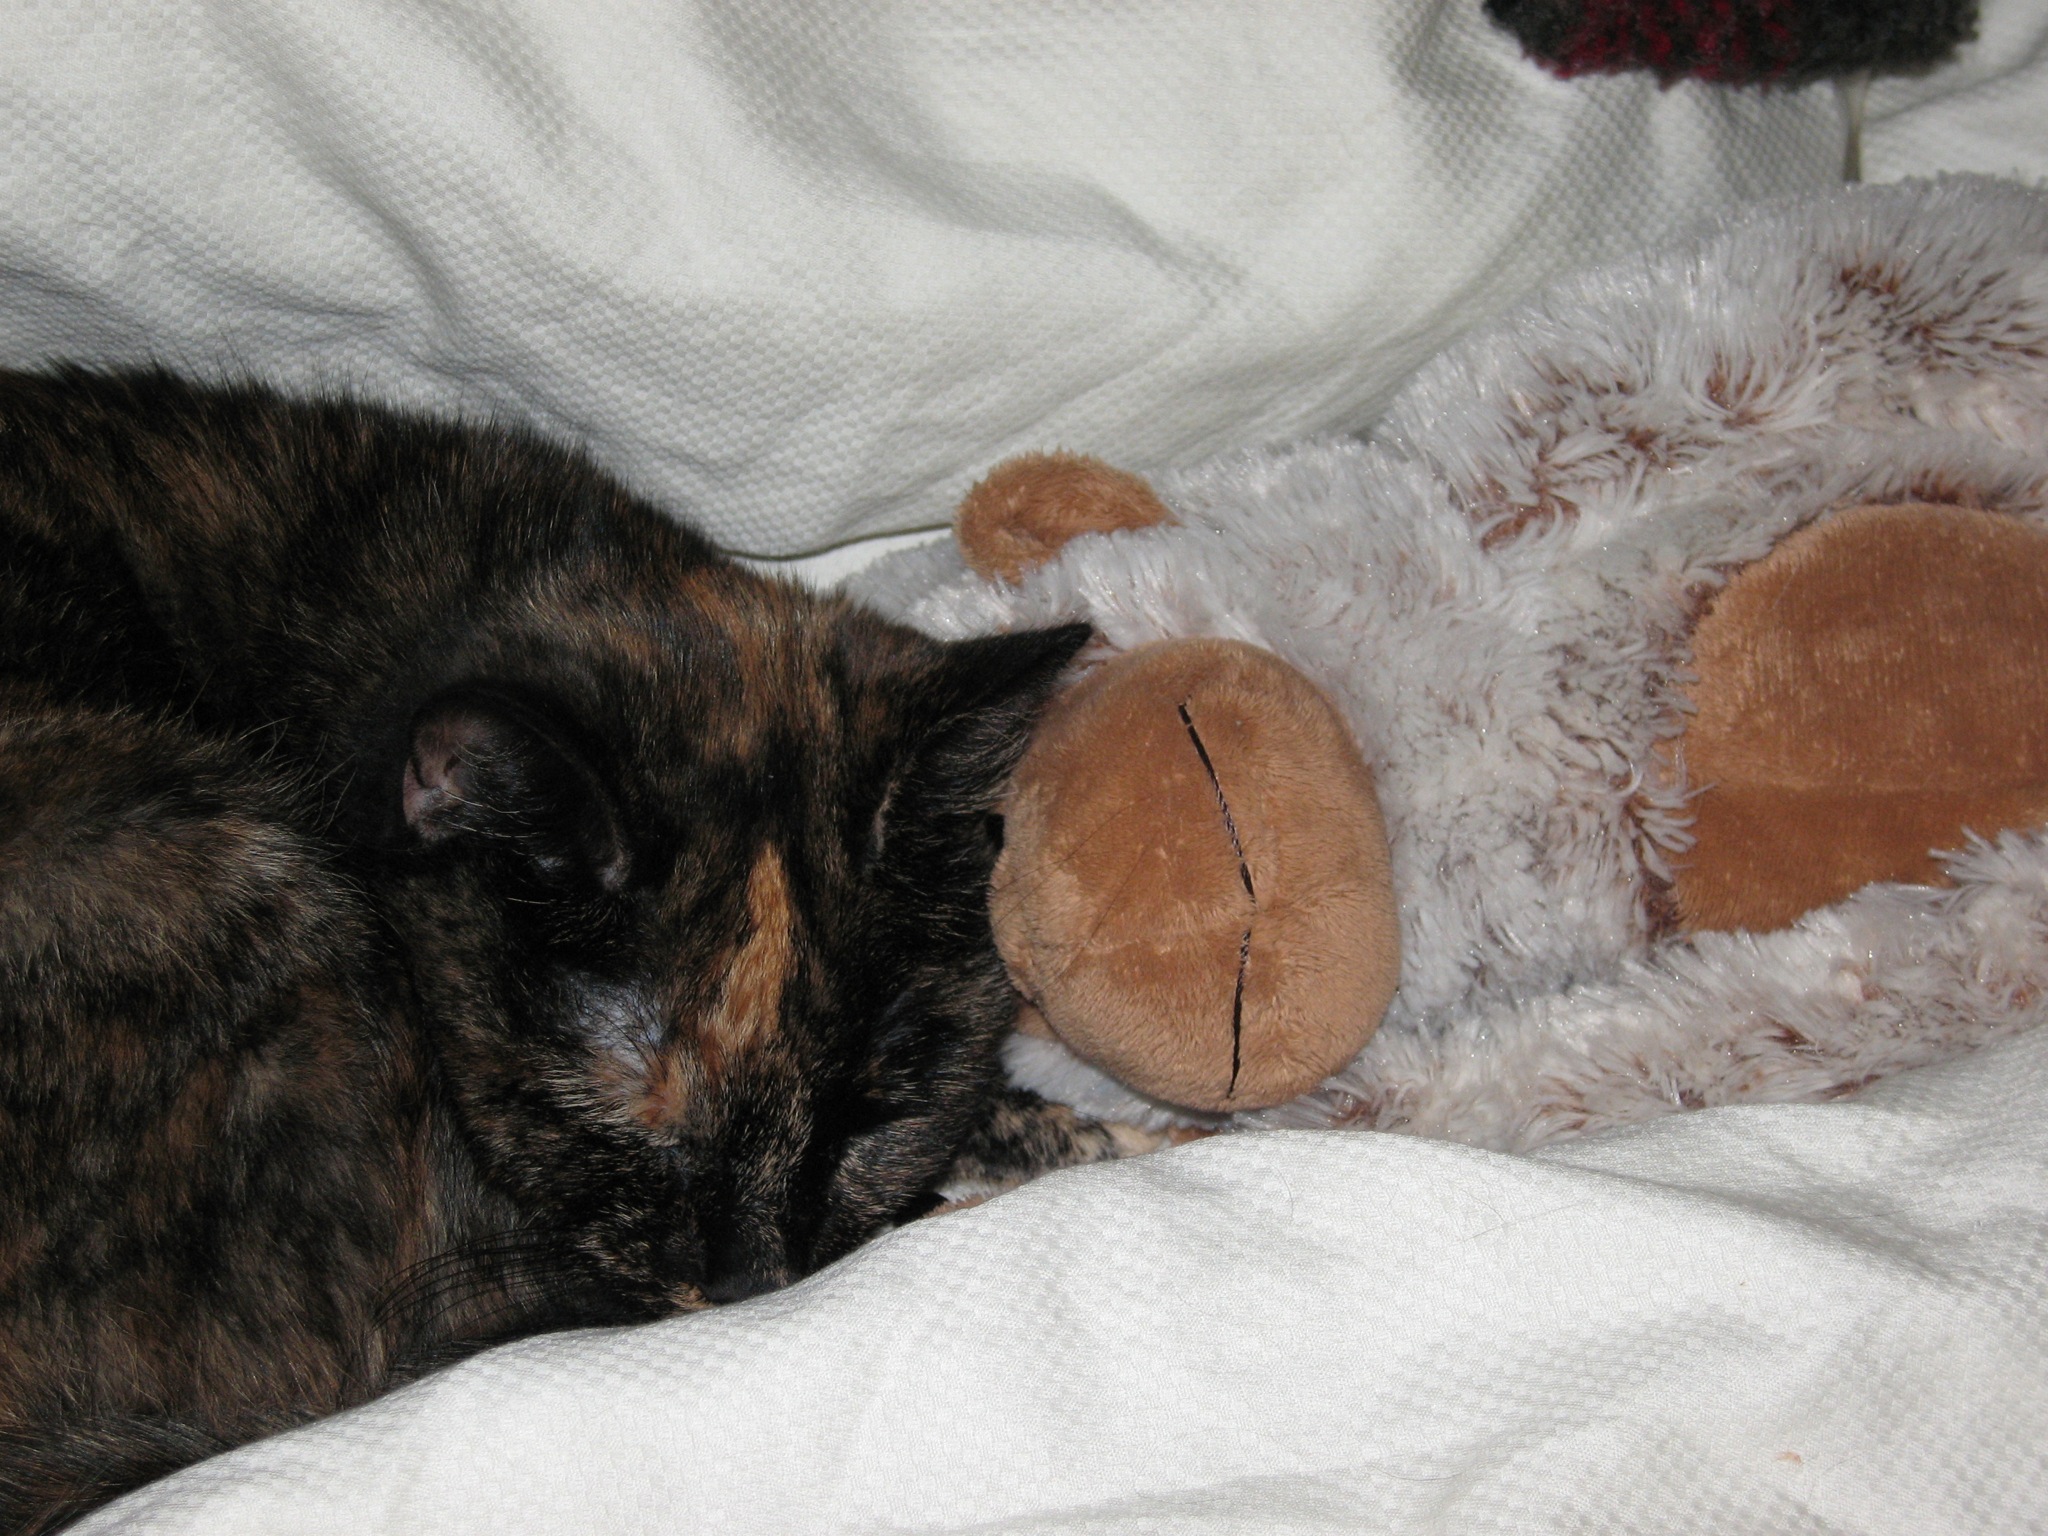 the cat is asleep on top of a stuffed animal